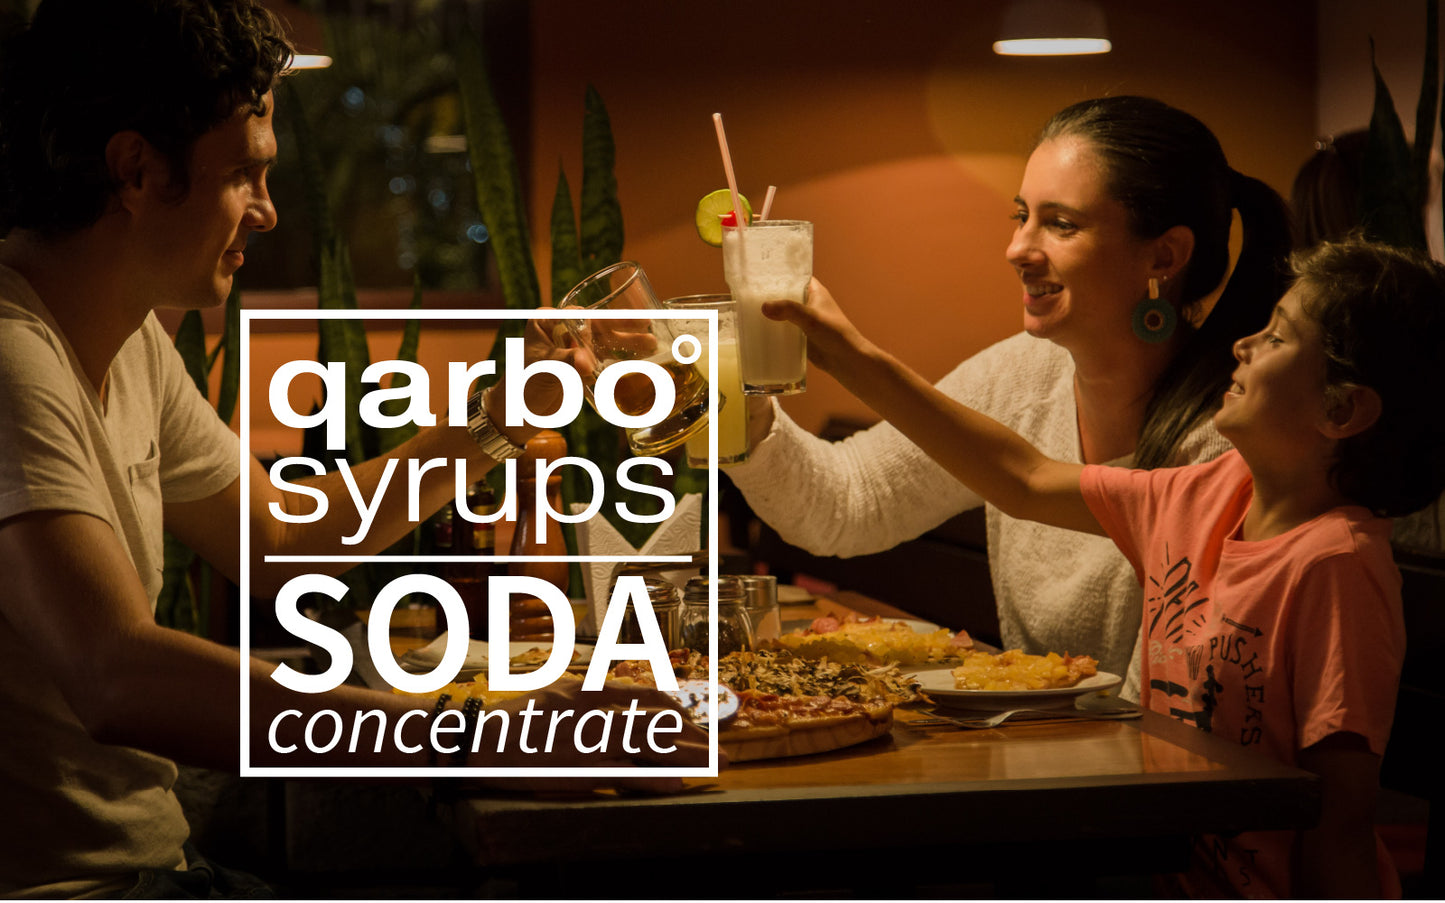 qarbo˚syrups - SODA CONCENTRATES - Mixed Pack of 3